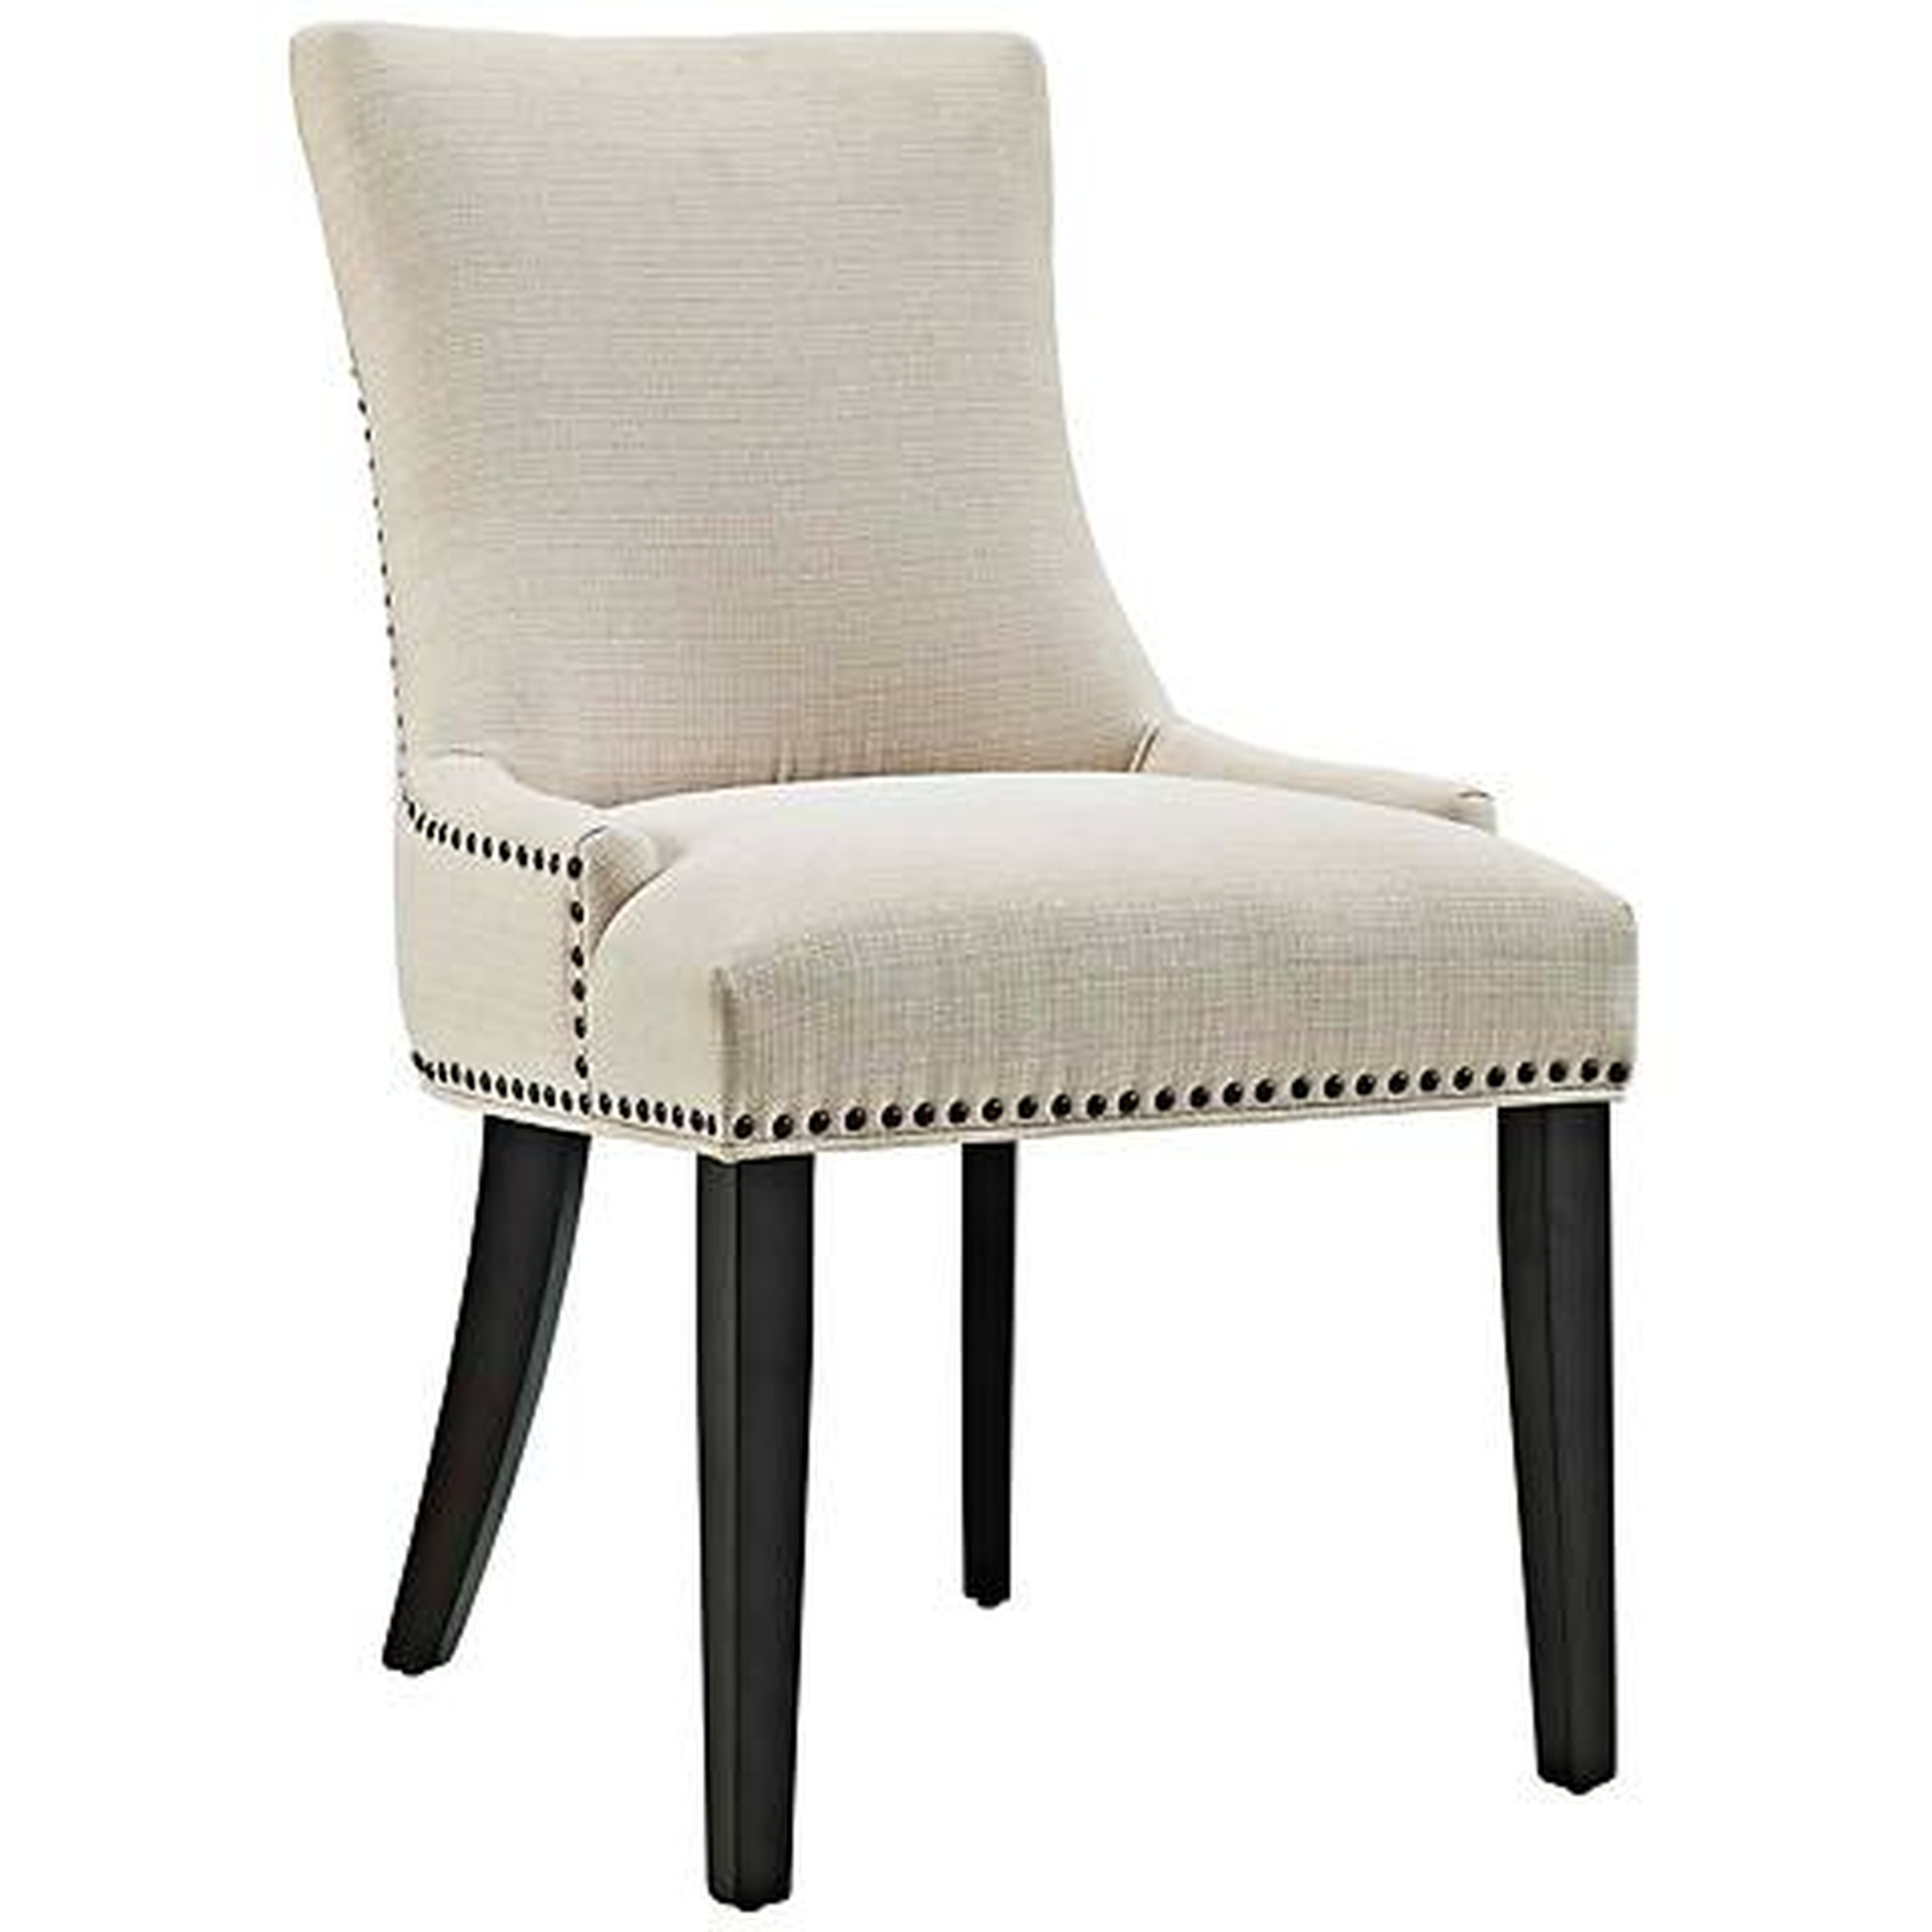 Marquis Fabric Dining Chair beige - Lamps Plus